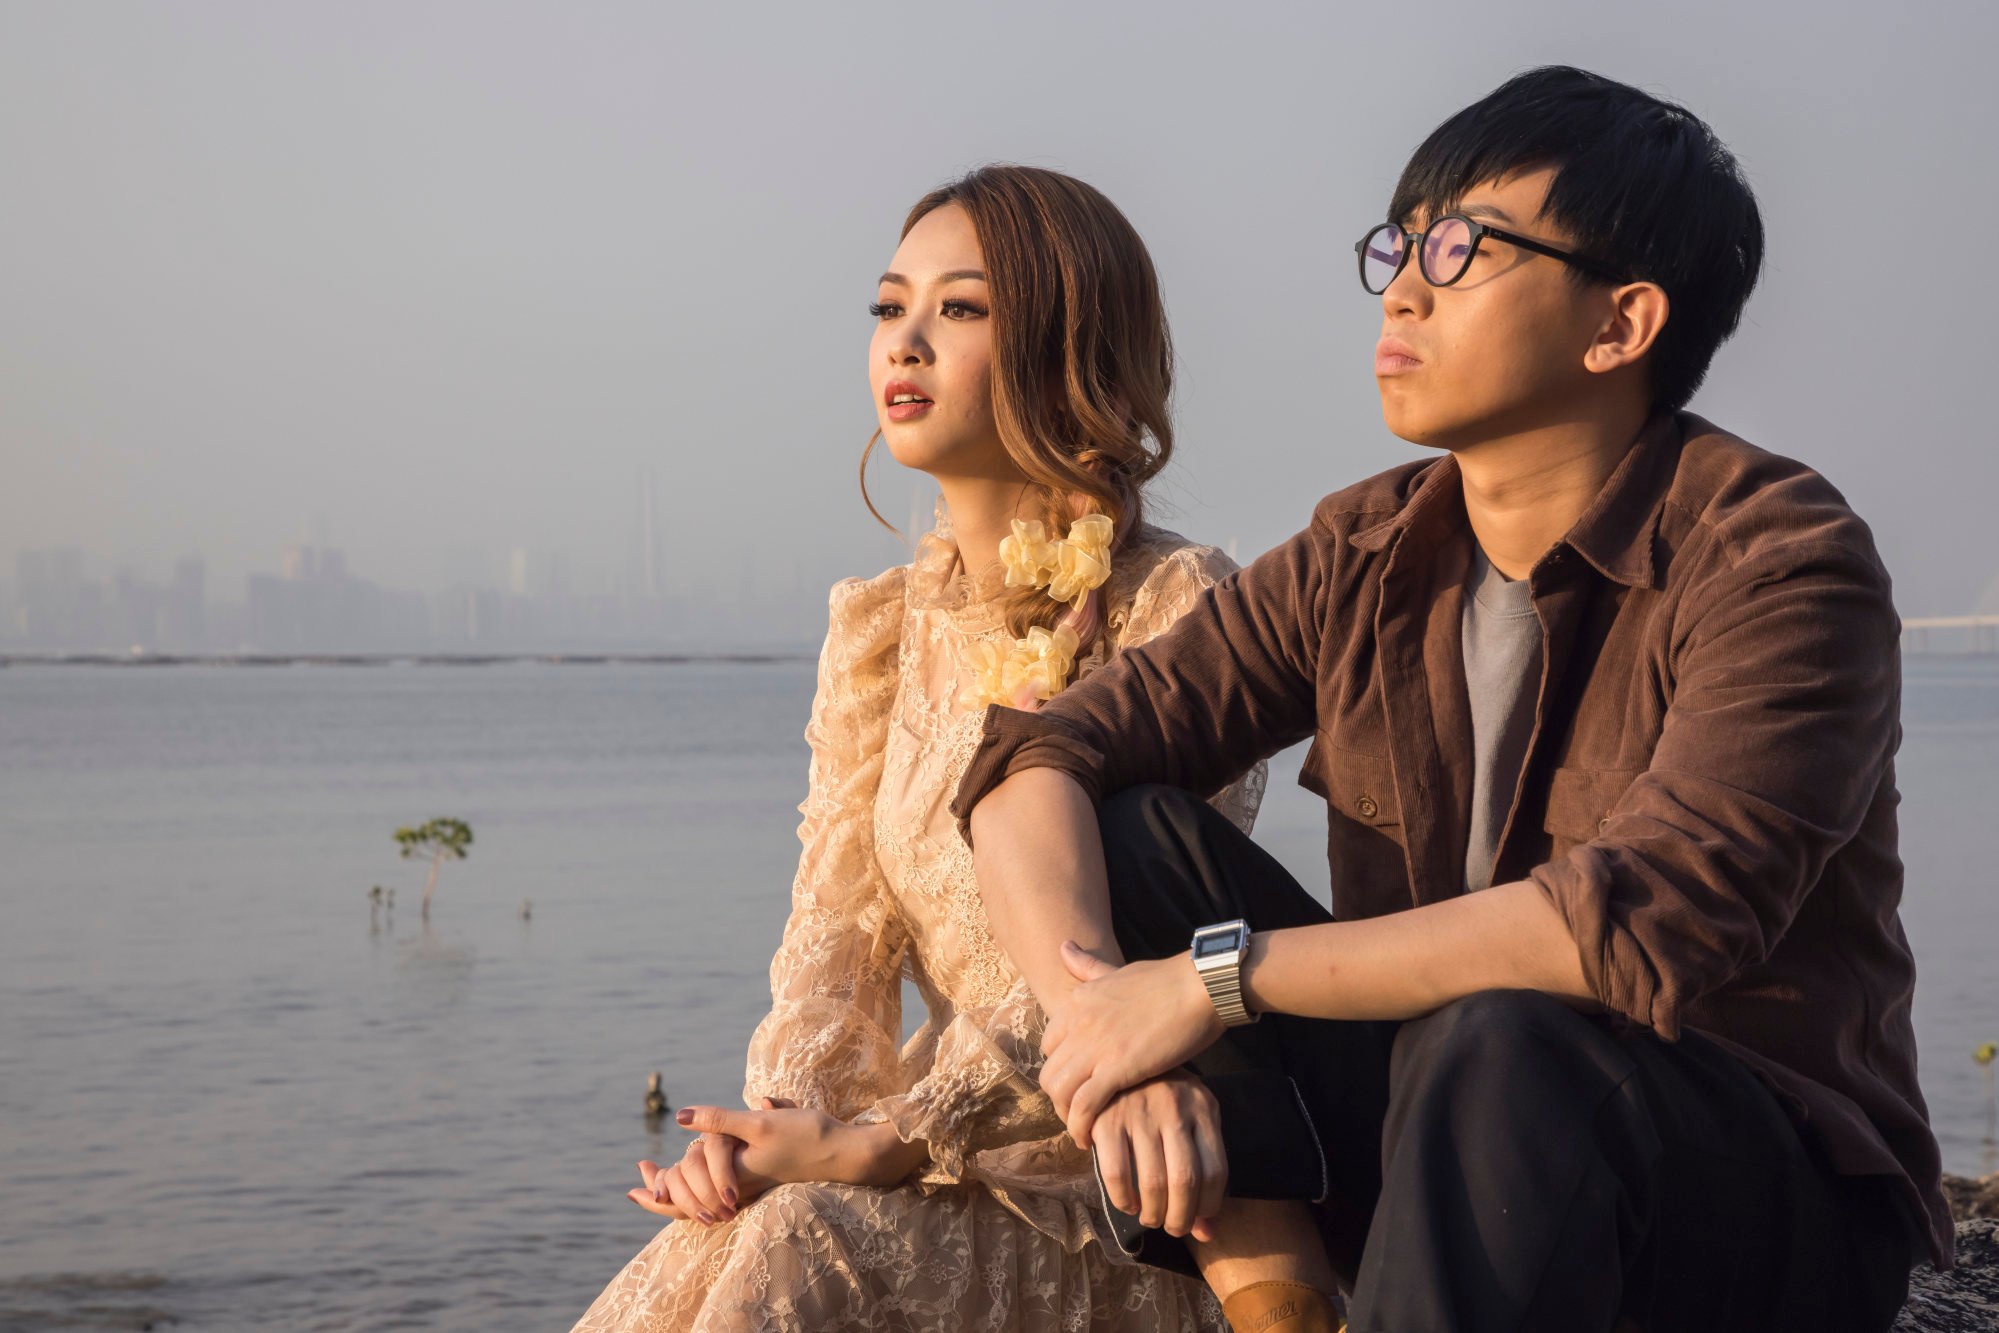 Far Far Away movie review: Hong Kong's remote fringes and culture explored  in Amos Why's quirky romantic comedy